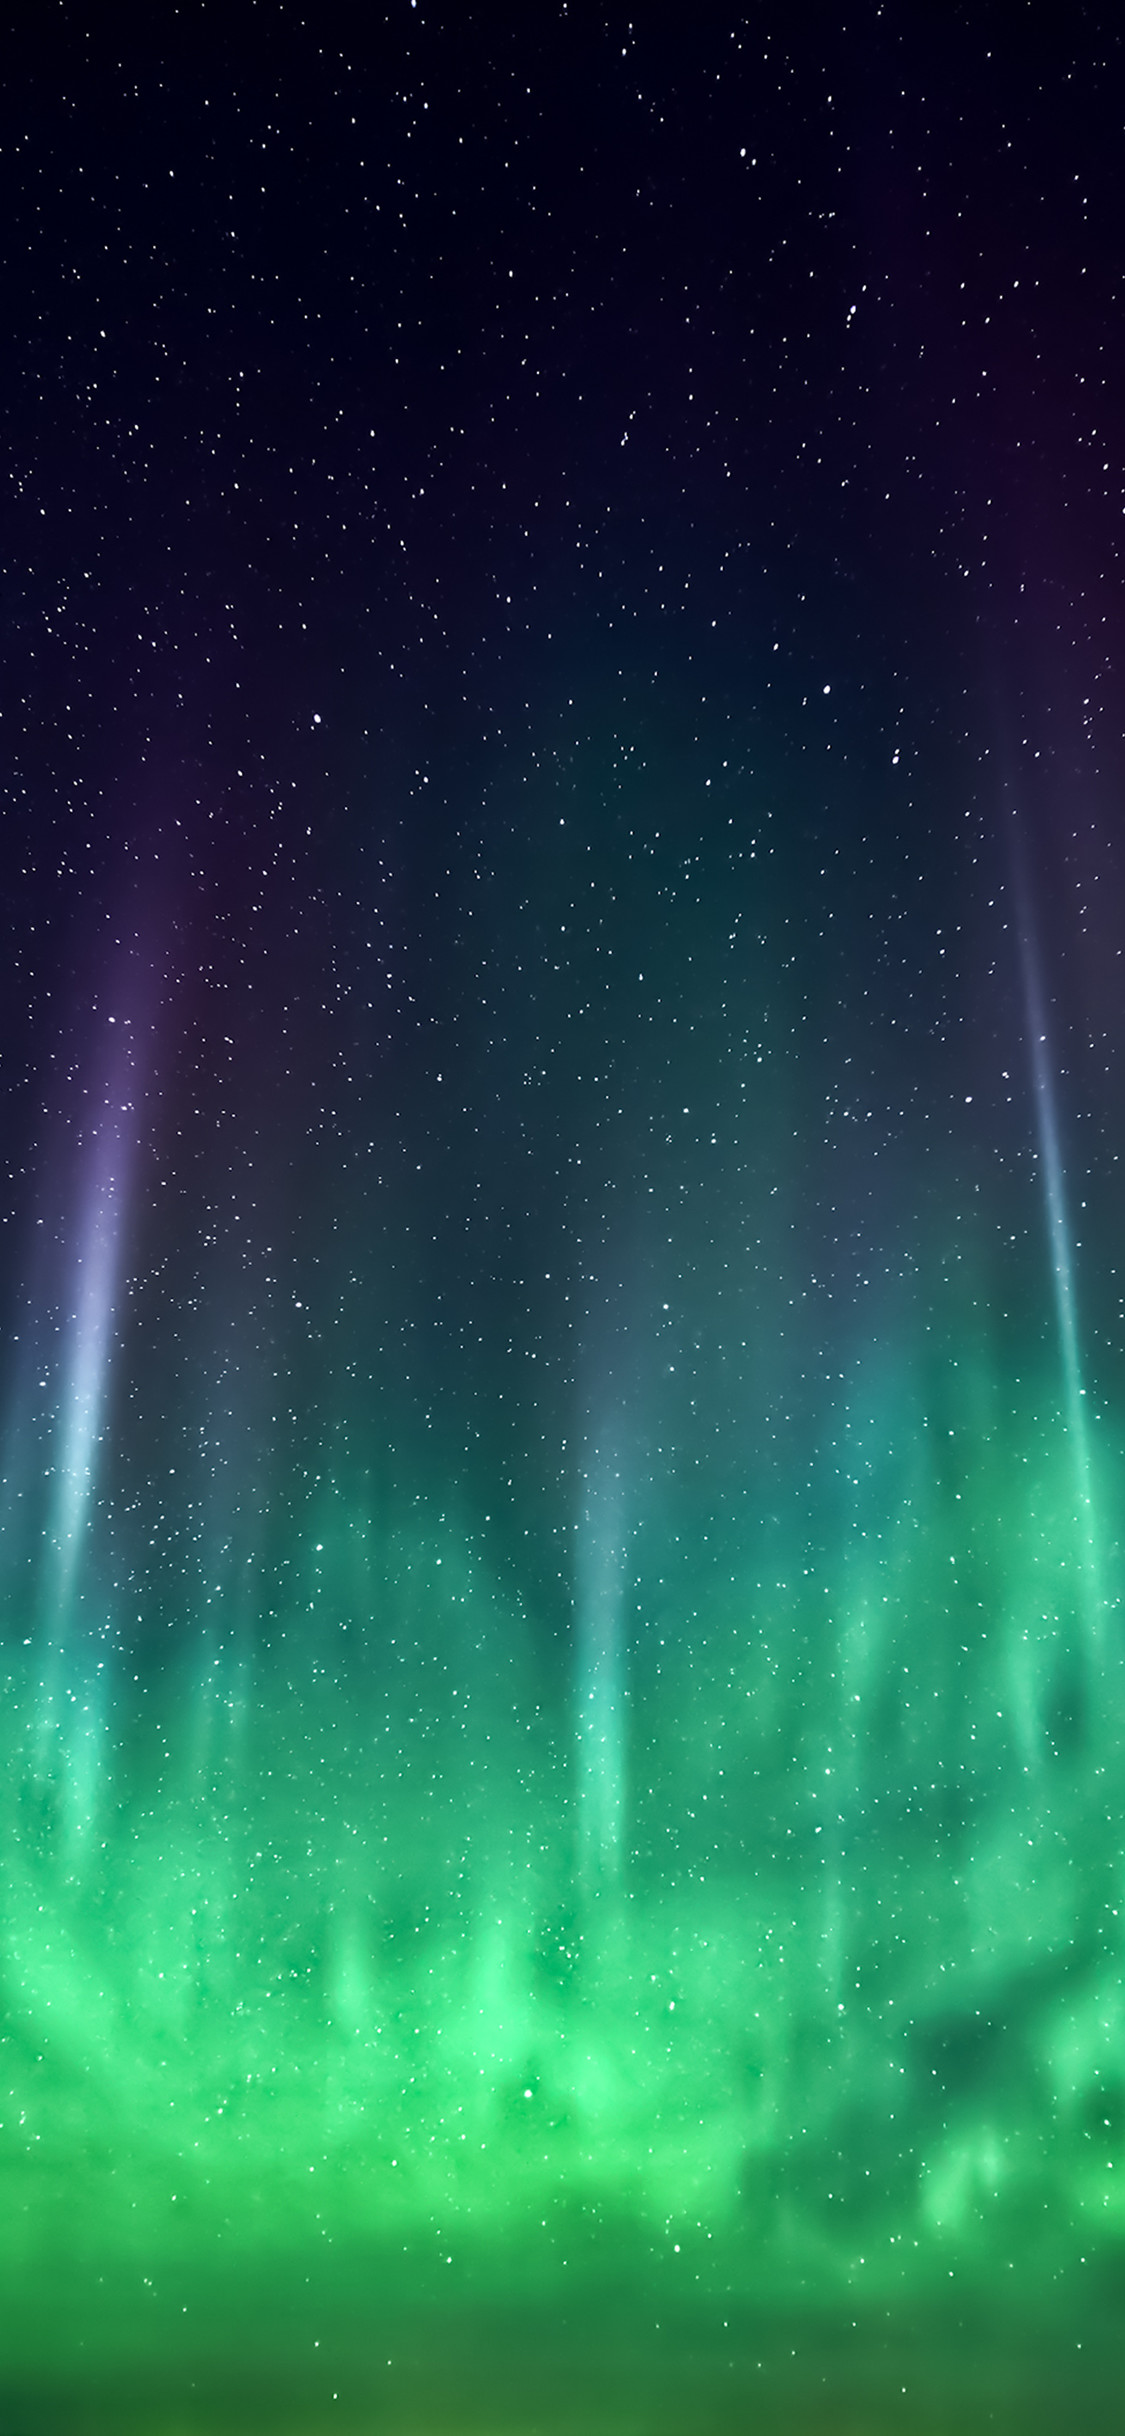 IOS 8 Stock Wallpapers (52+ images)